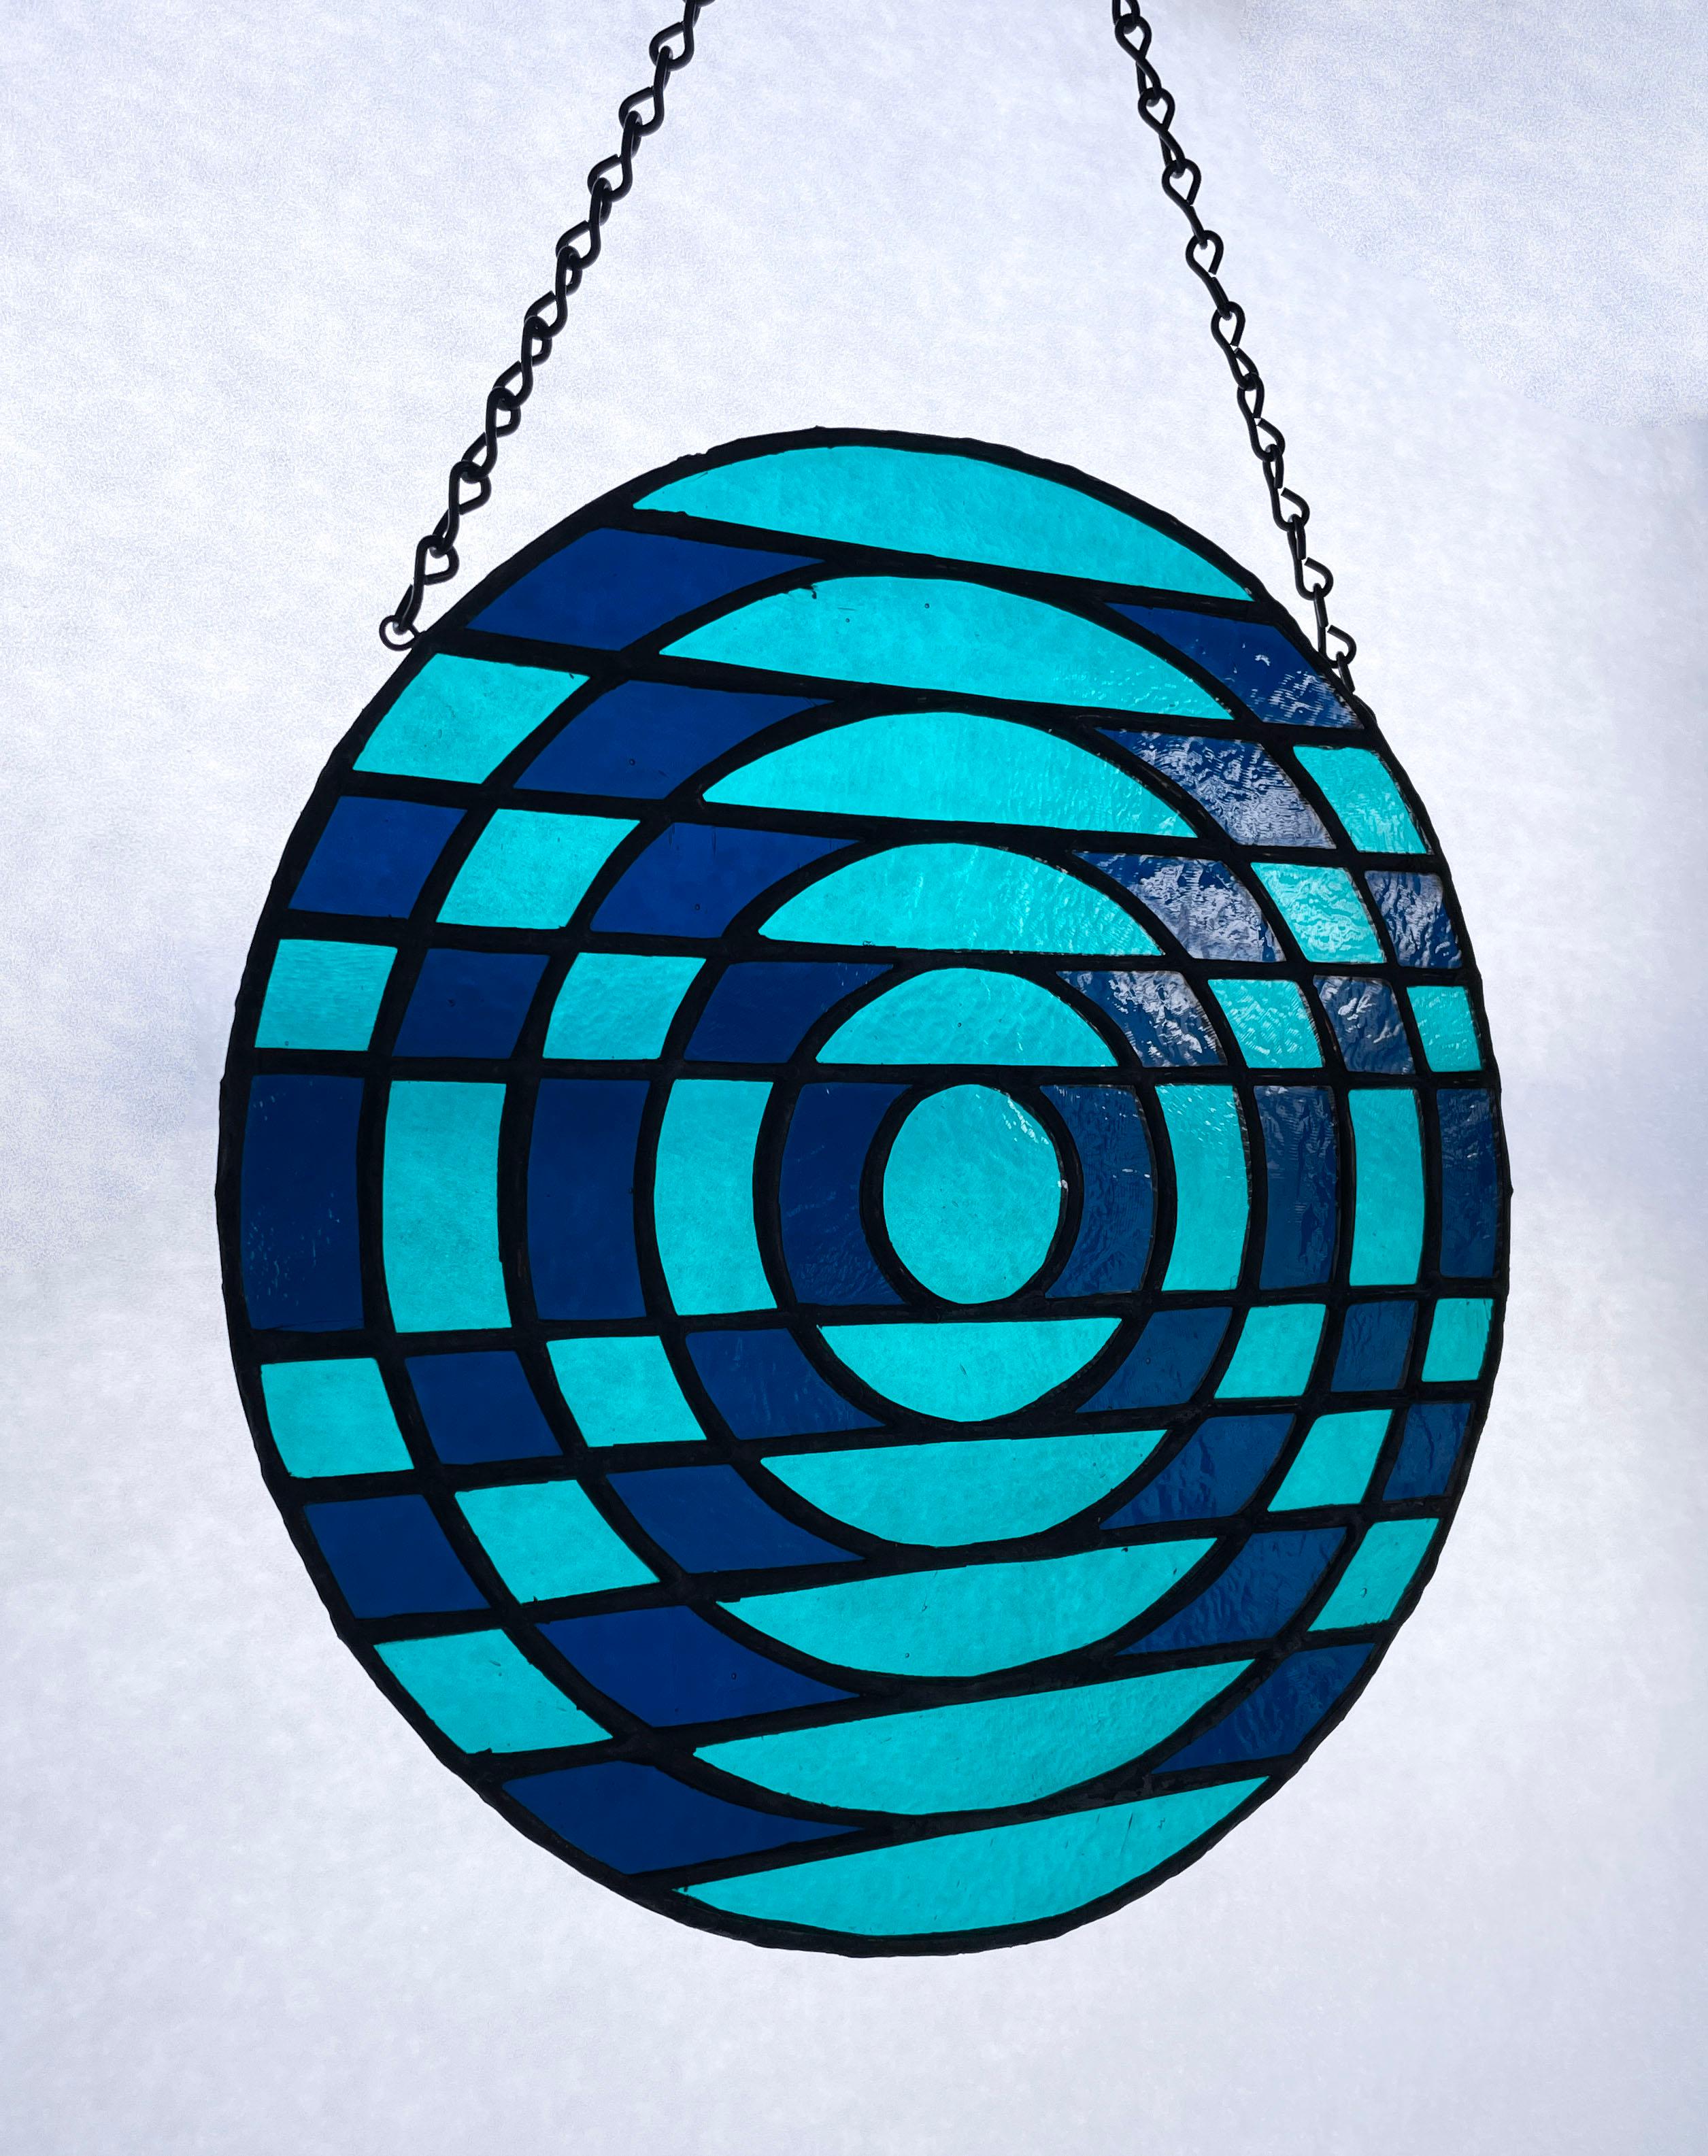 Handcrafted by TF Dutchman, Japanese Optical is a one of a kind original stained glass window panel. This piece uses Bullseye transparent copper blue and teal cathedral glass and hangs on a chain. Please feel free to inquire about custom colors and